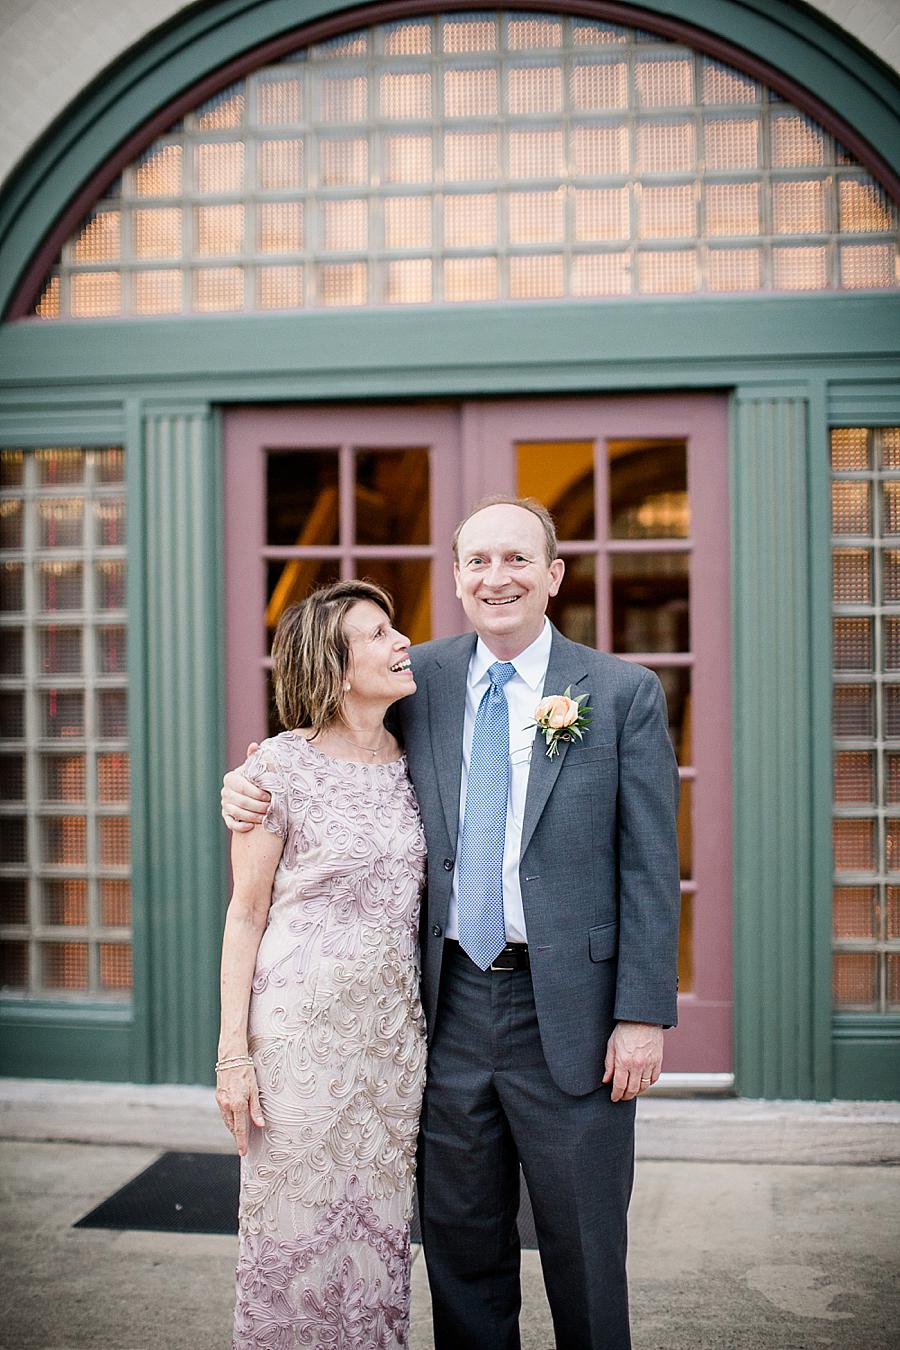 Parents of the groom at this Southern Railway Station Wedding by Knoxville Wedding Photographer, Amanda May Photos.